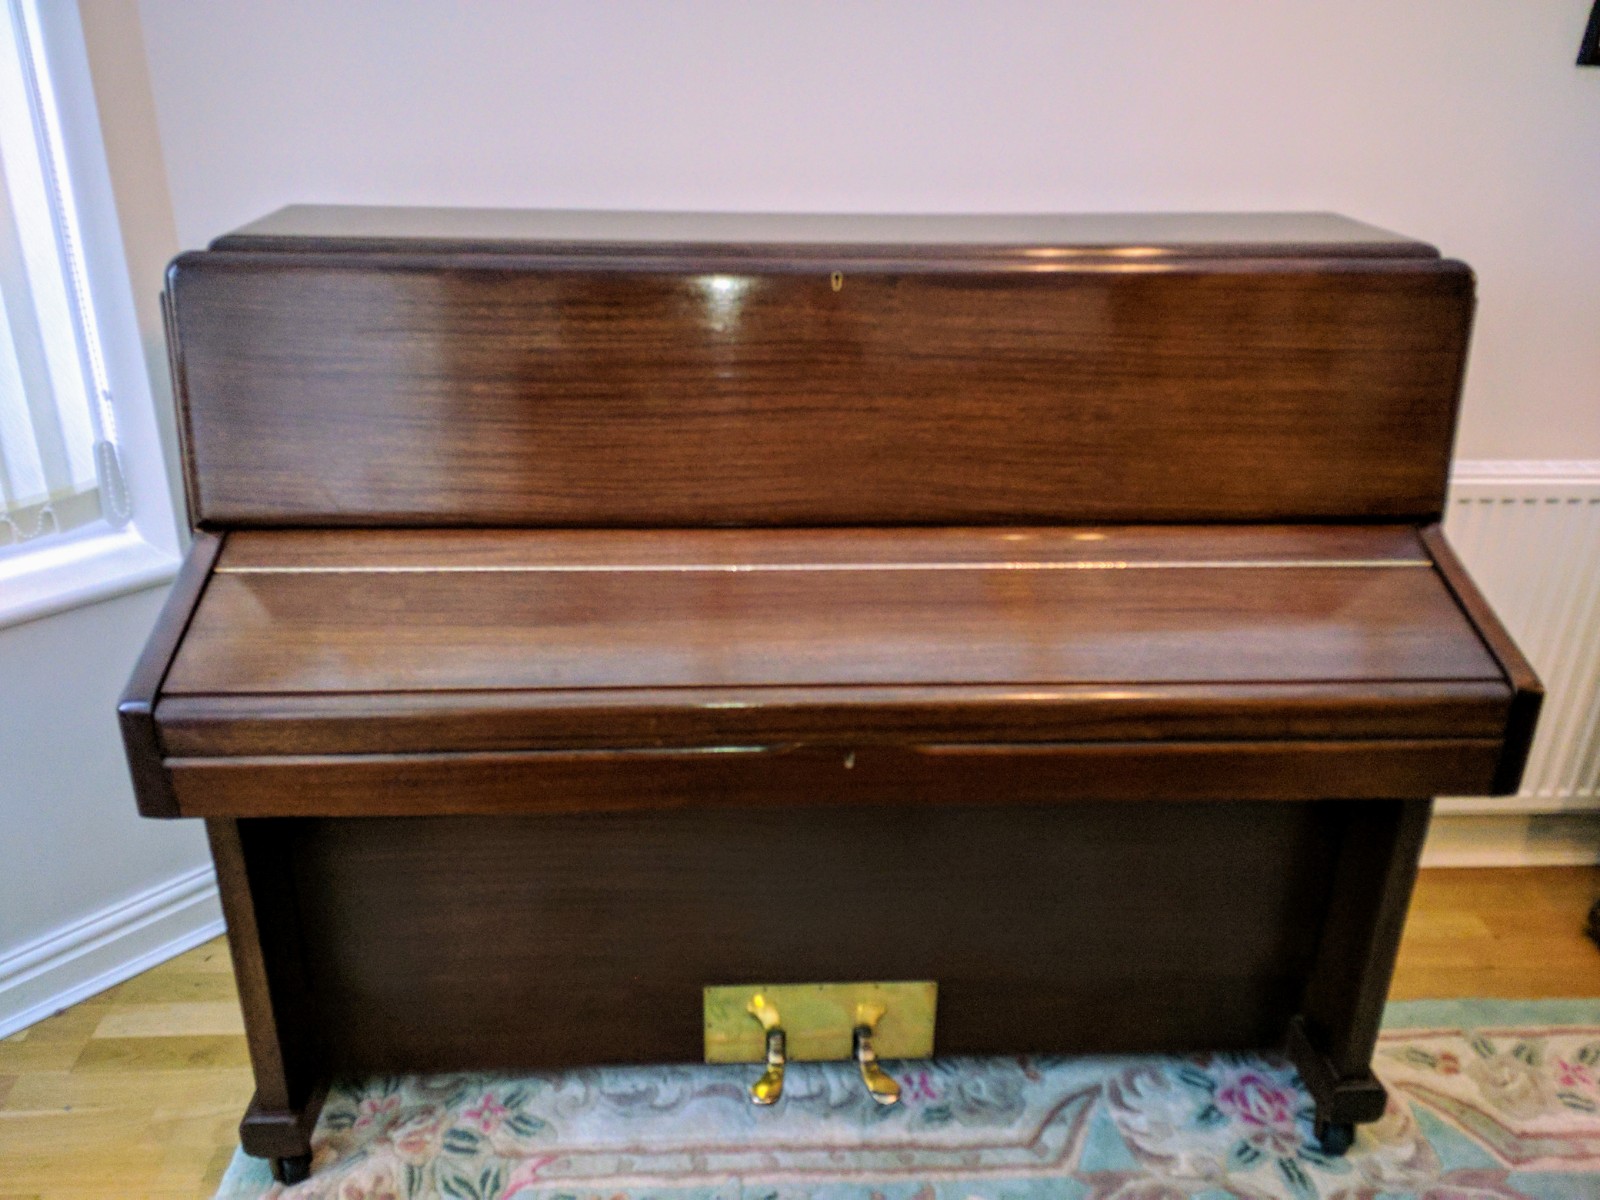 Casework of Scholze Upright Piano